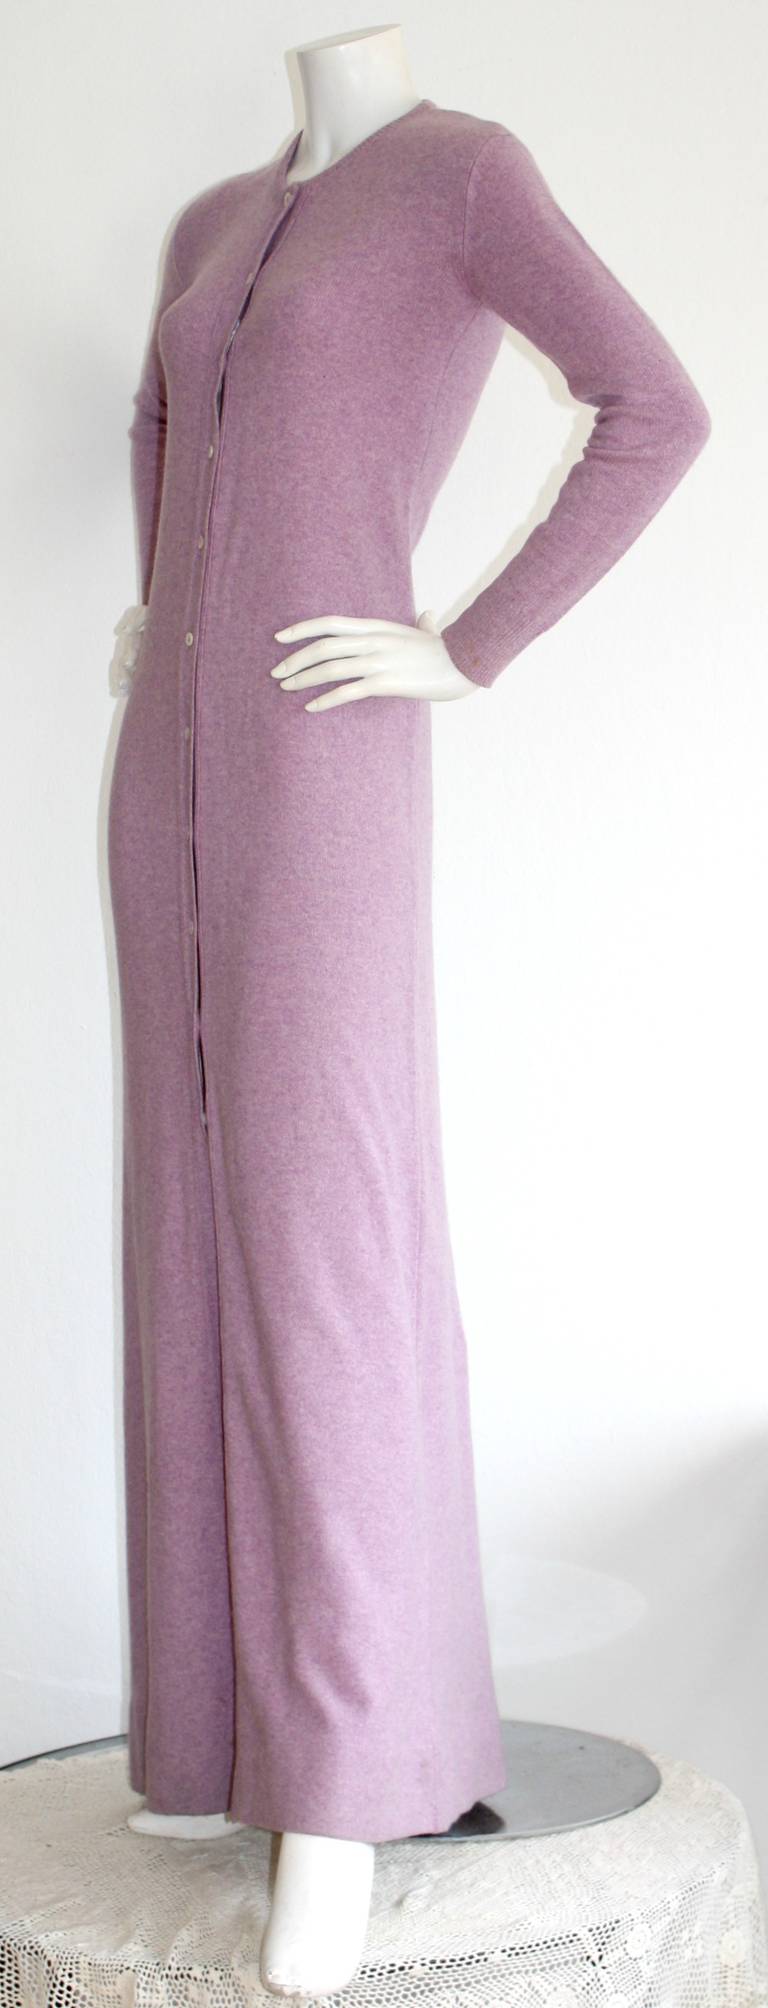 A truly magnificent vintage Halston piece! This dress is 100% cashmere, and just feels so luxurious! Beautiful lilac purple color. Looks great layered, or with a belt, too. Can easily be dressed up or down. In great condition. Approximately Size